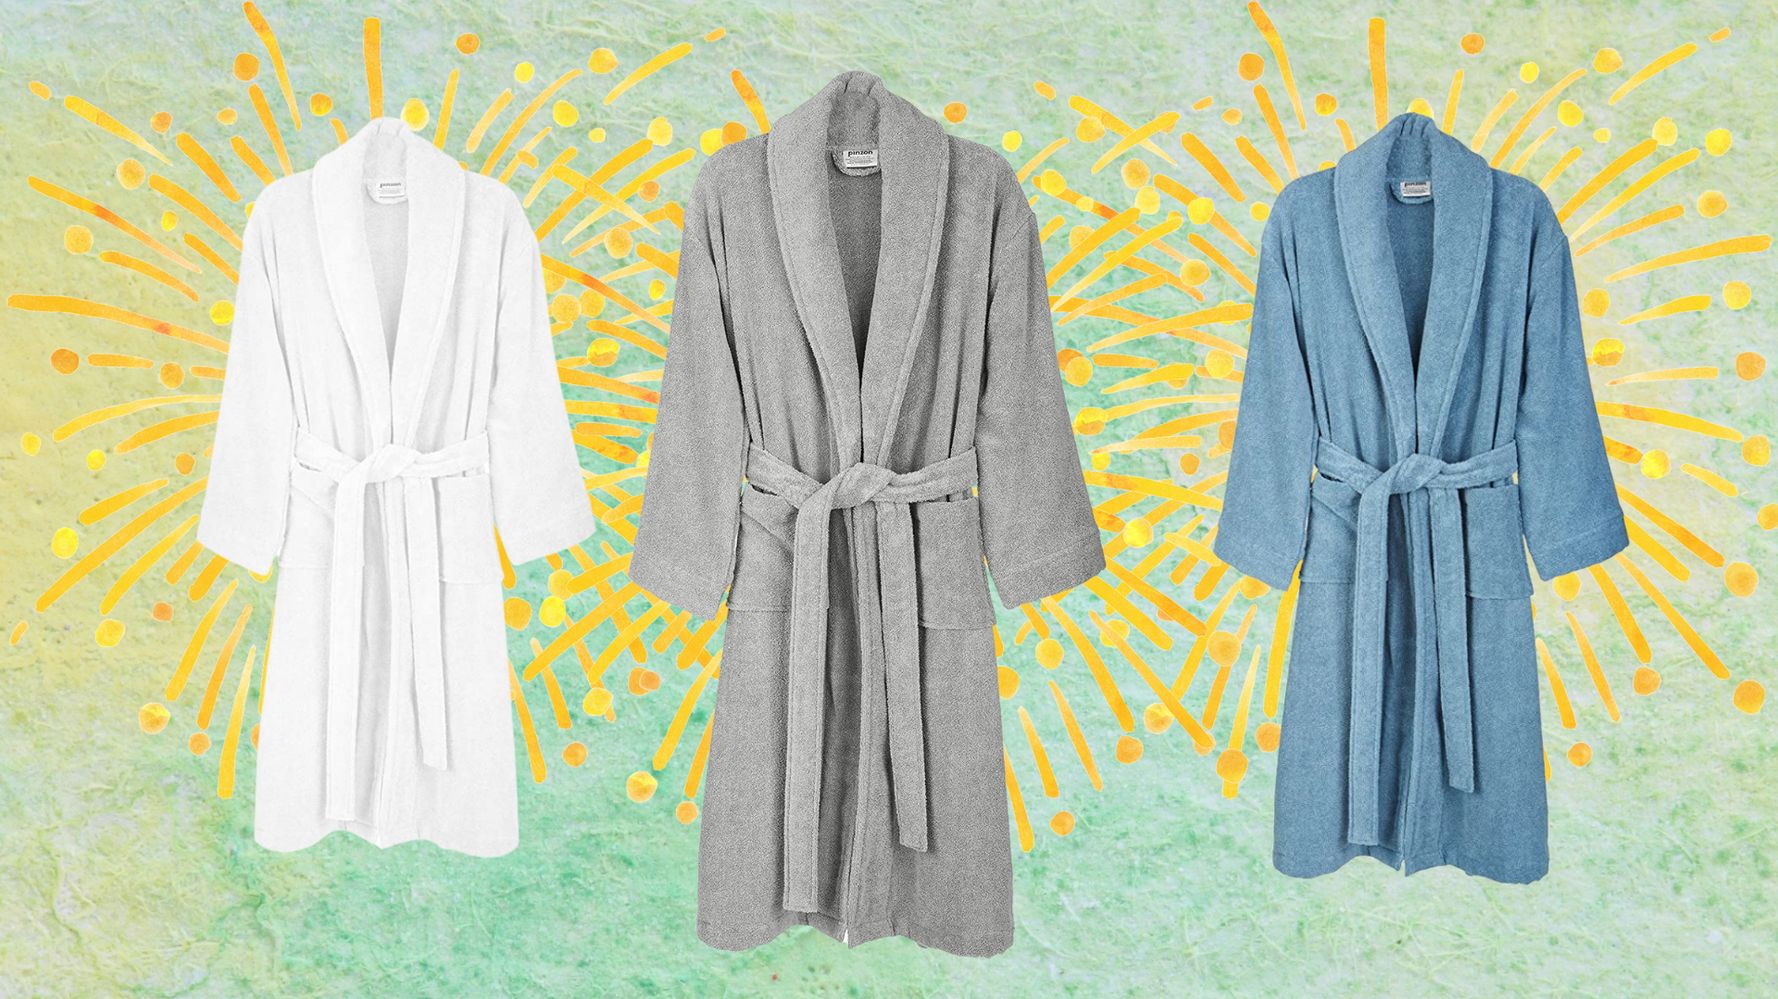 Hotel Edition White Waffle/Terry Men Bathrobe, with Silver Name (at Front)  Personalized (L)